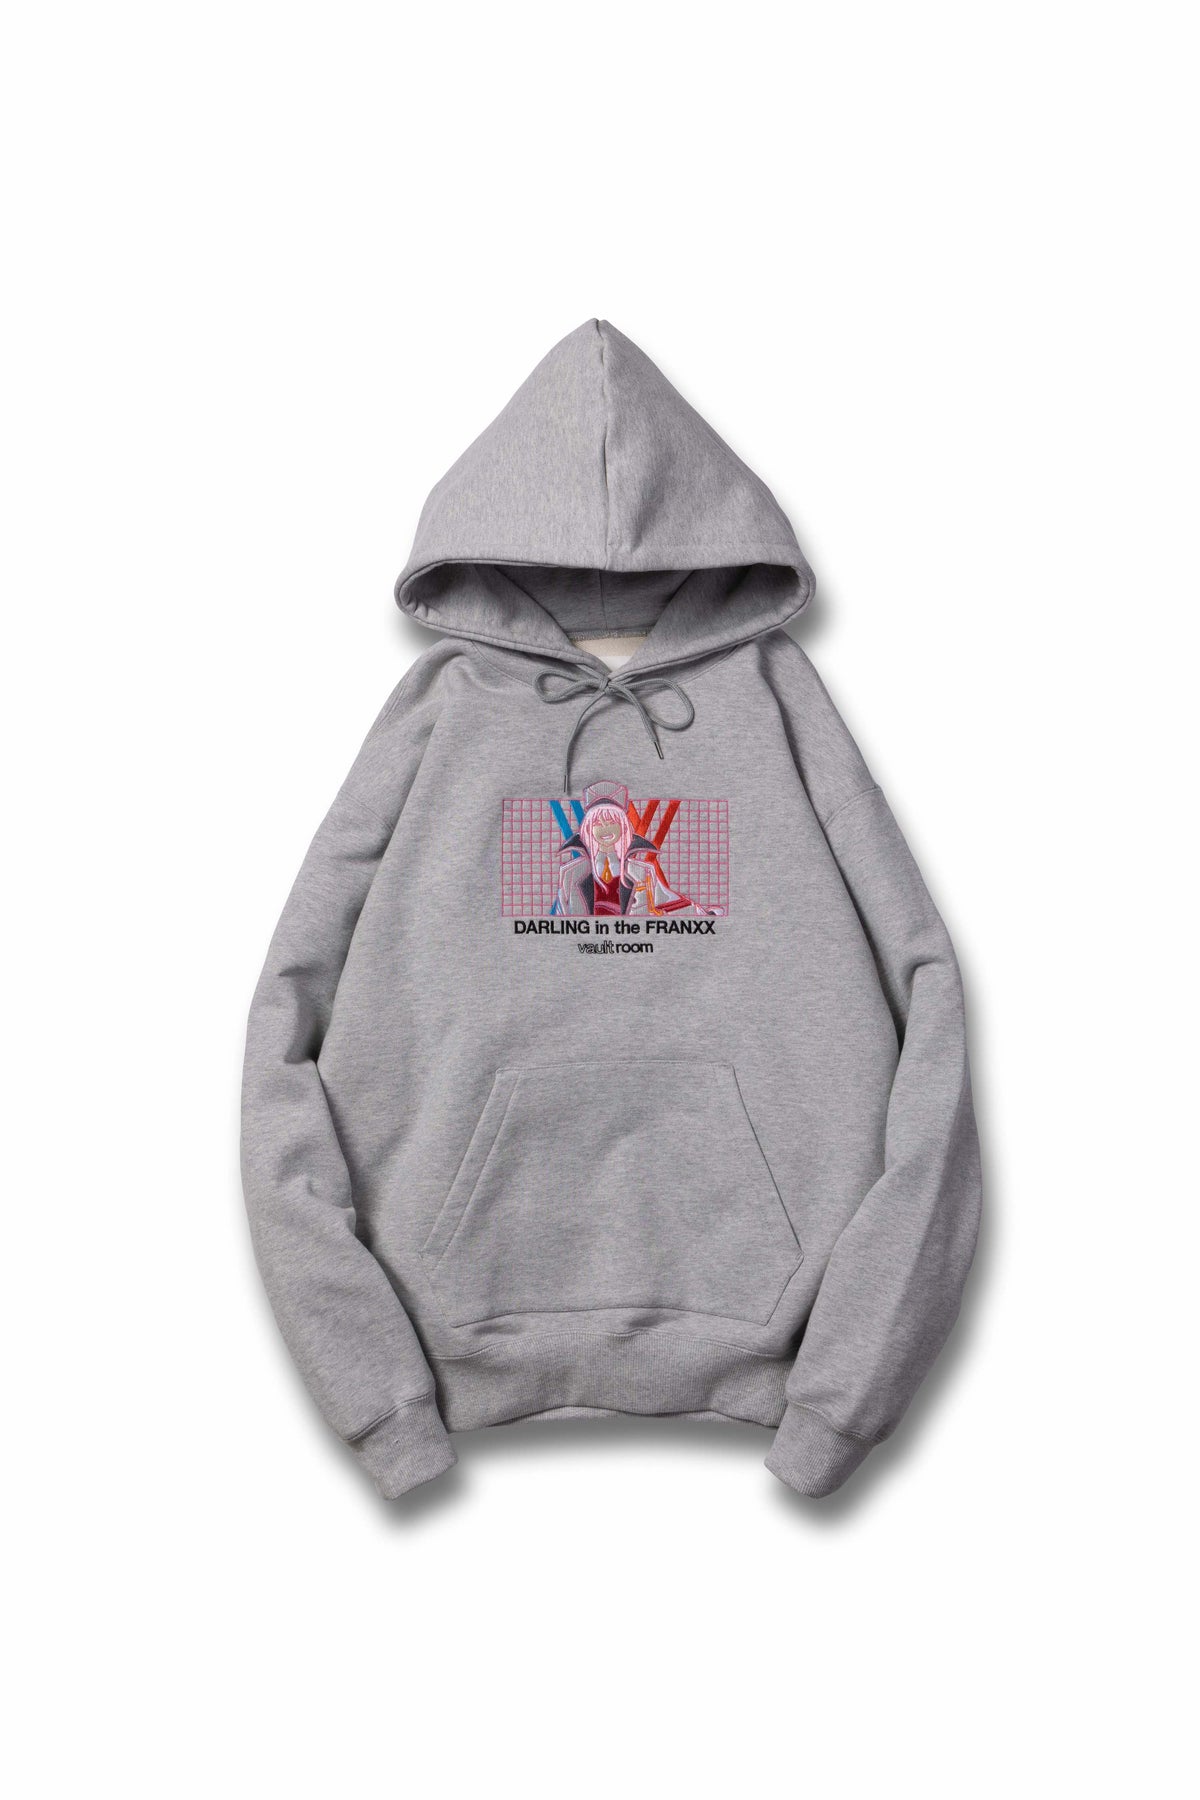 cotton100%VR × 002 HOODIE / GRY　size: XL